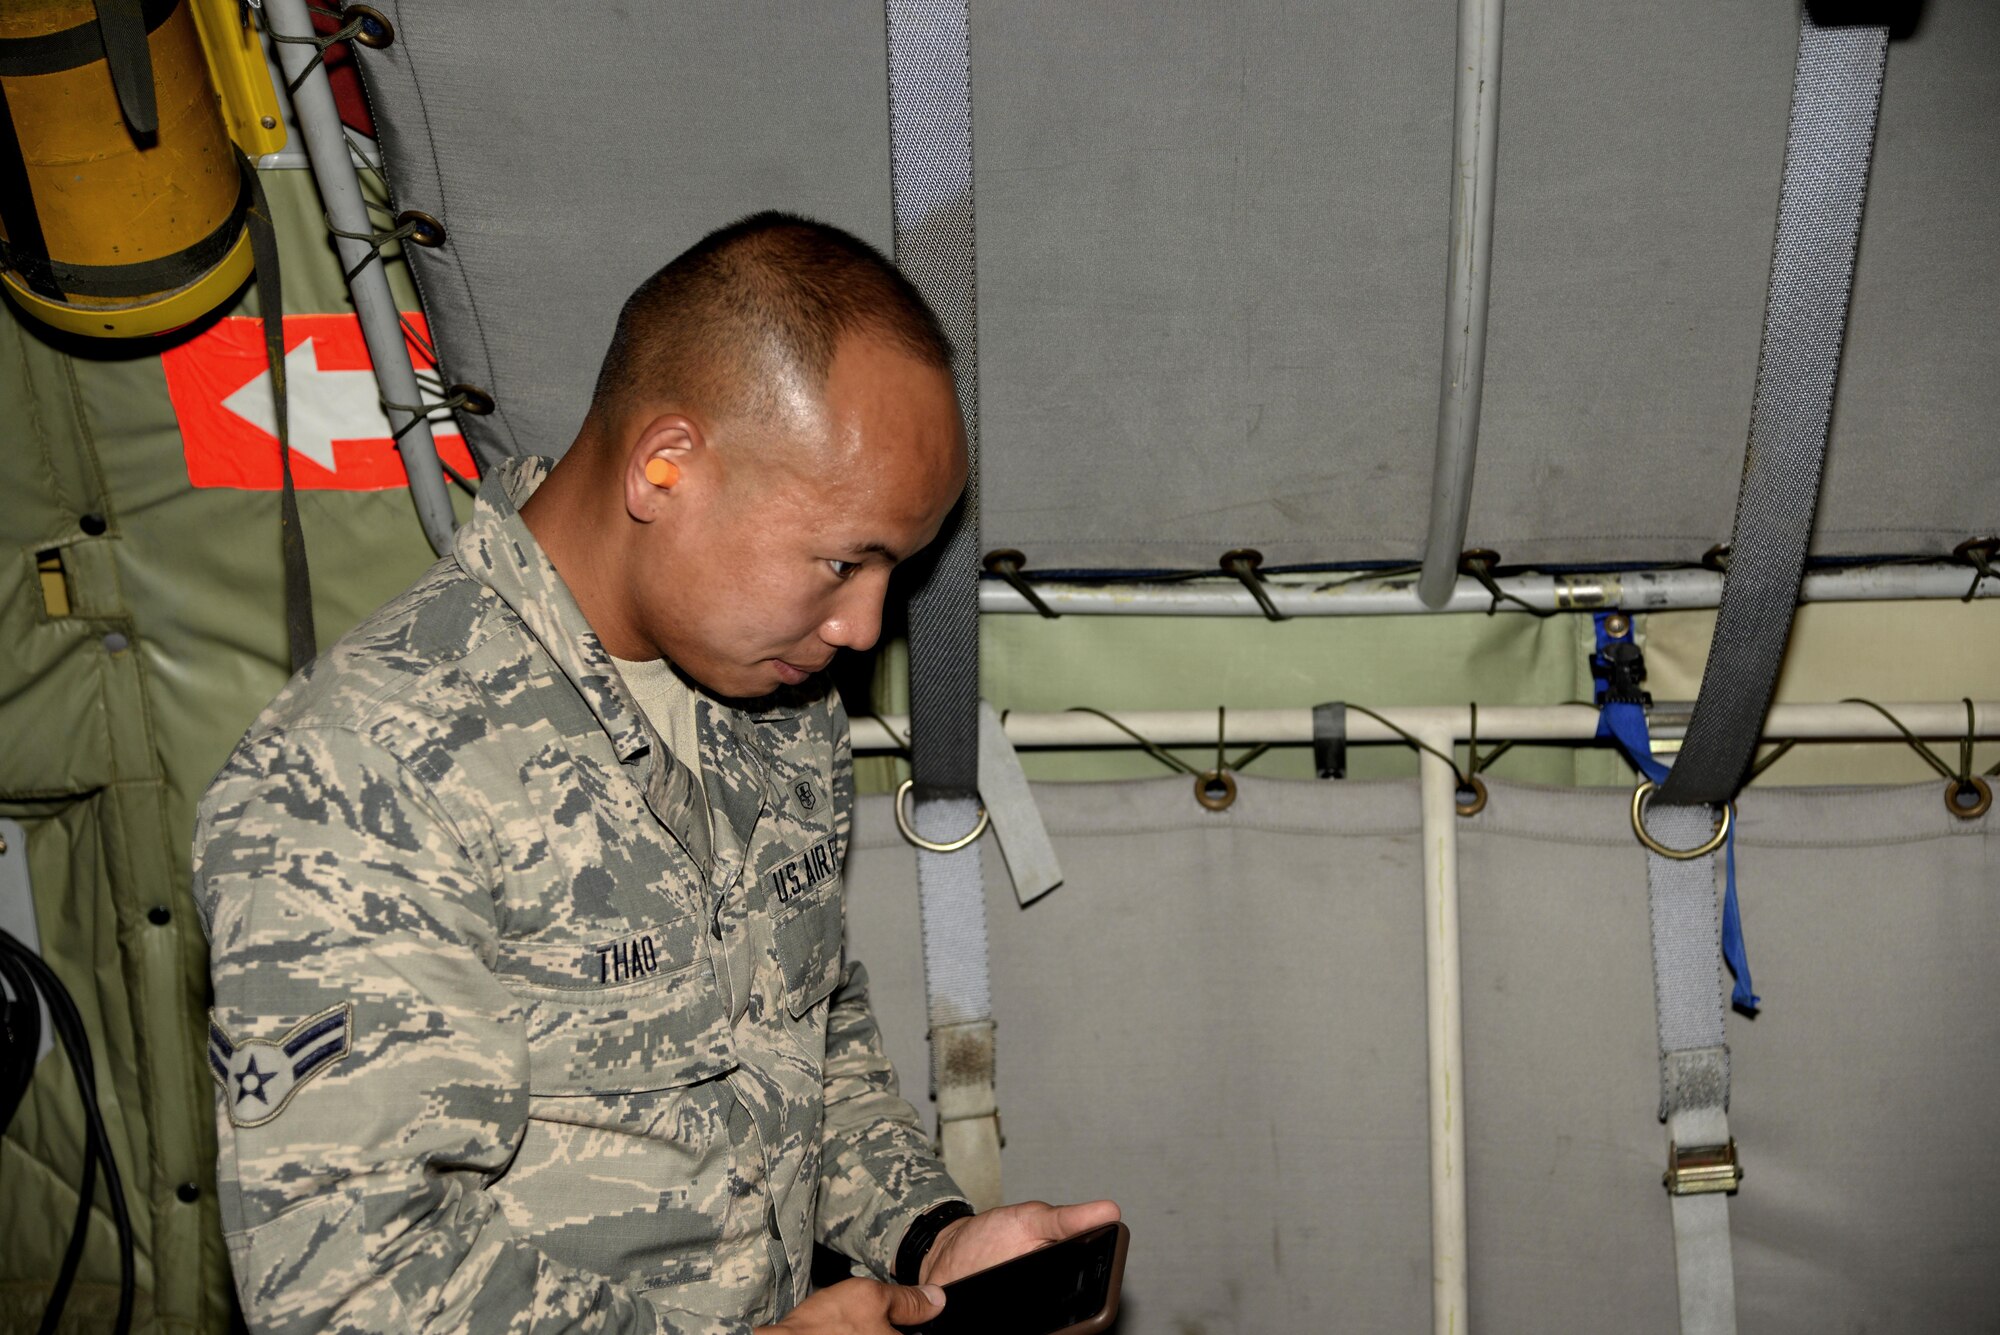 Airman 1st Class Seng Thao, a health services management journeyman assigned to the 6th Medical Support Squadron prepares to photograph his experience in the boom pod. Airmen were given the opportunity to photograph in the boom pod during the refueling of F-22 Raptors. (U.S. Air Force photo by Airman 1st Class Rito Smith)